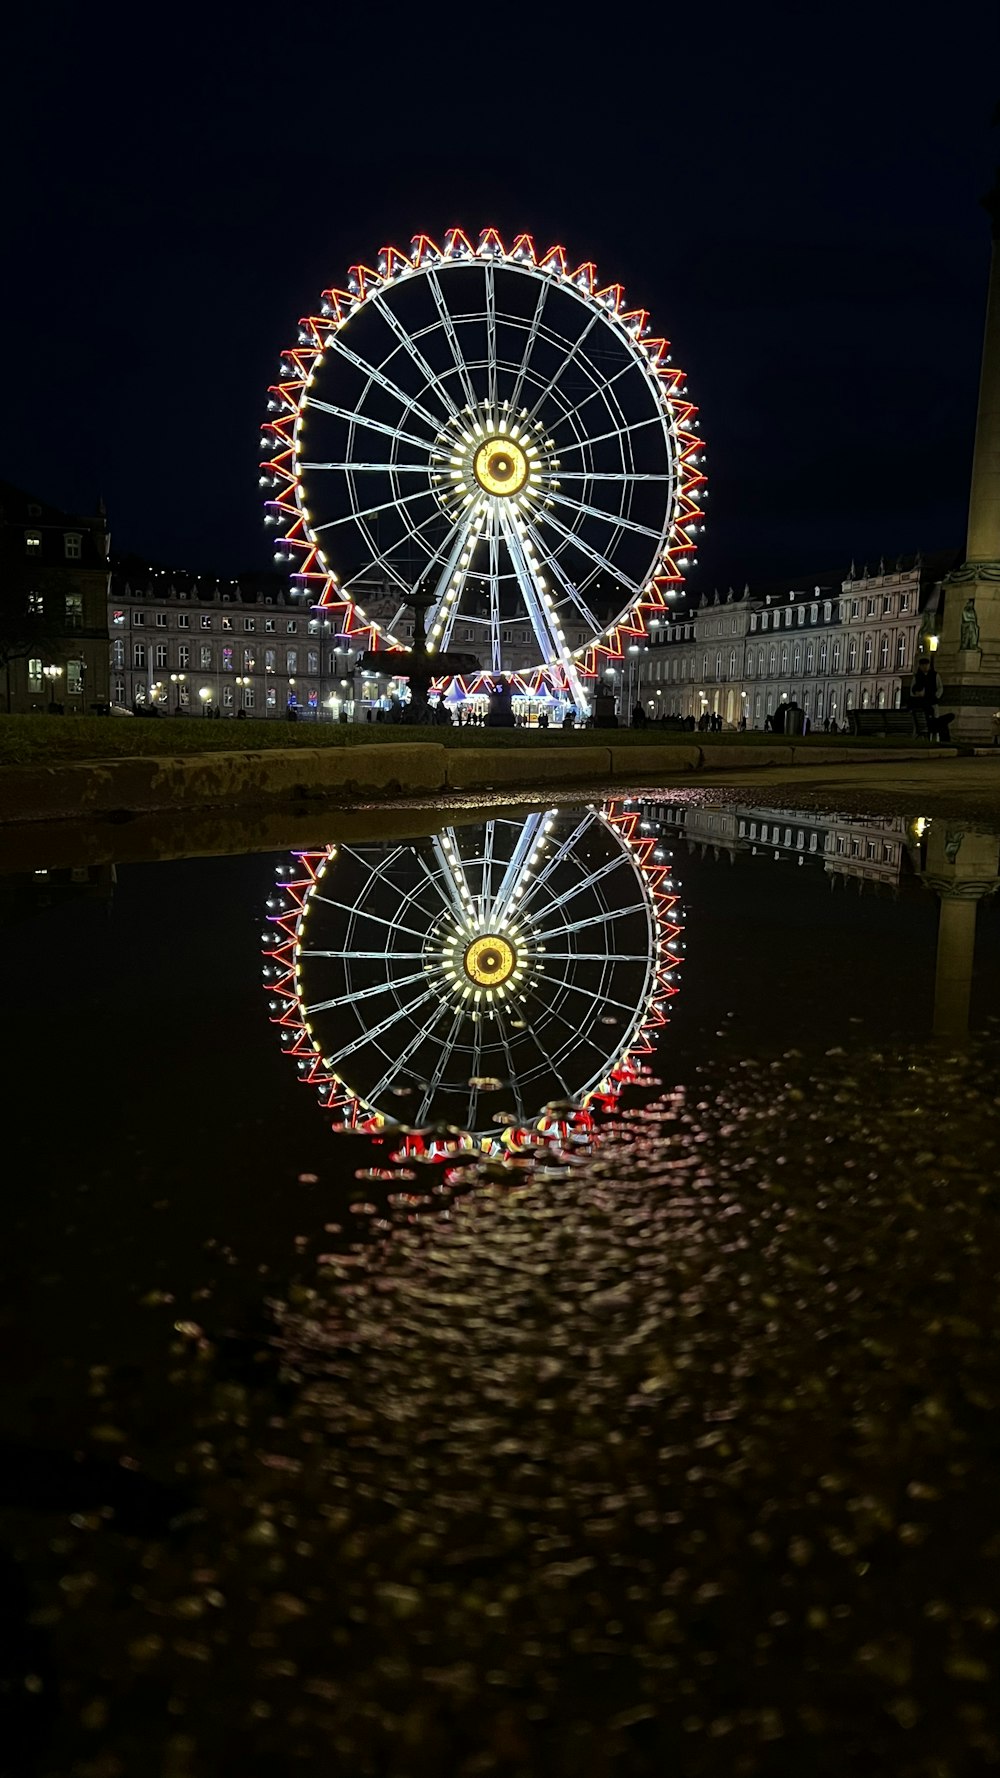 a ferris wheel is lit up at night